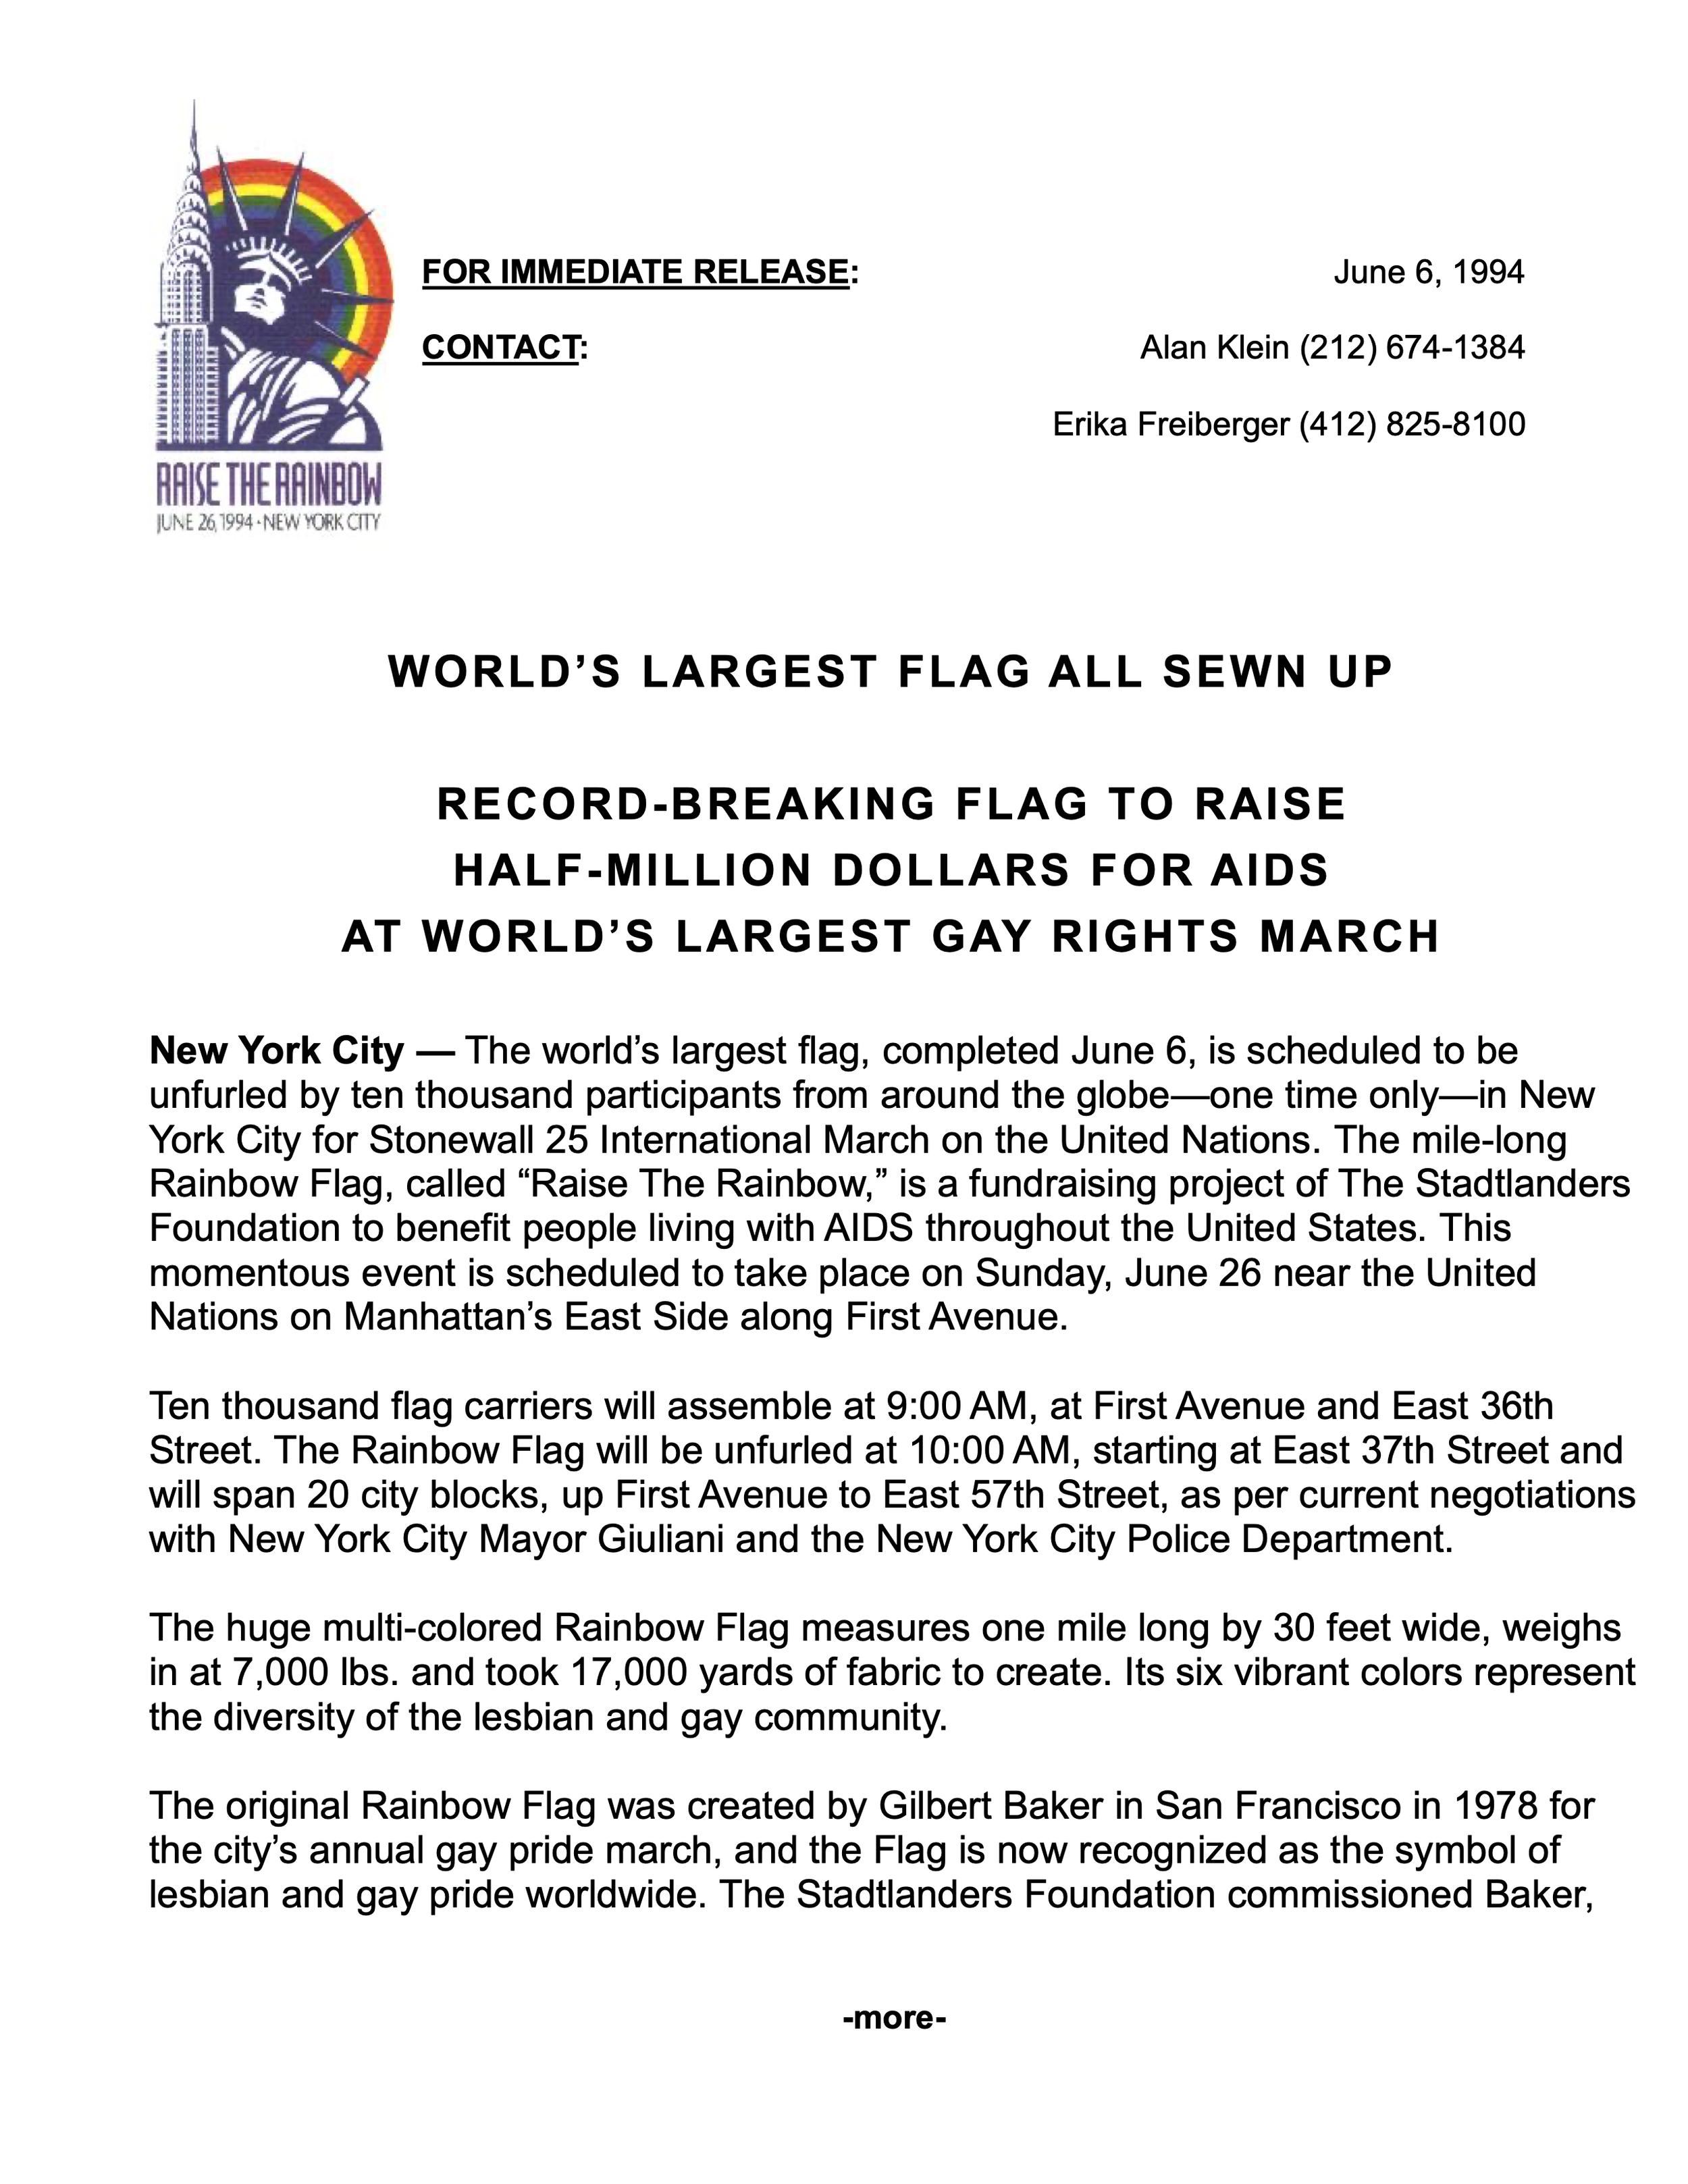 World’s Largest Flag All Sewn Up: Record-Breaking Flag To Raise Half-Million Dollars For AIDS At World’s Largest Gay Rights March